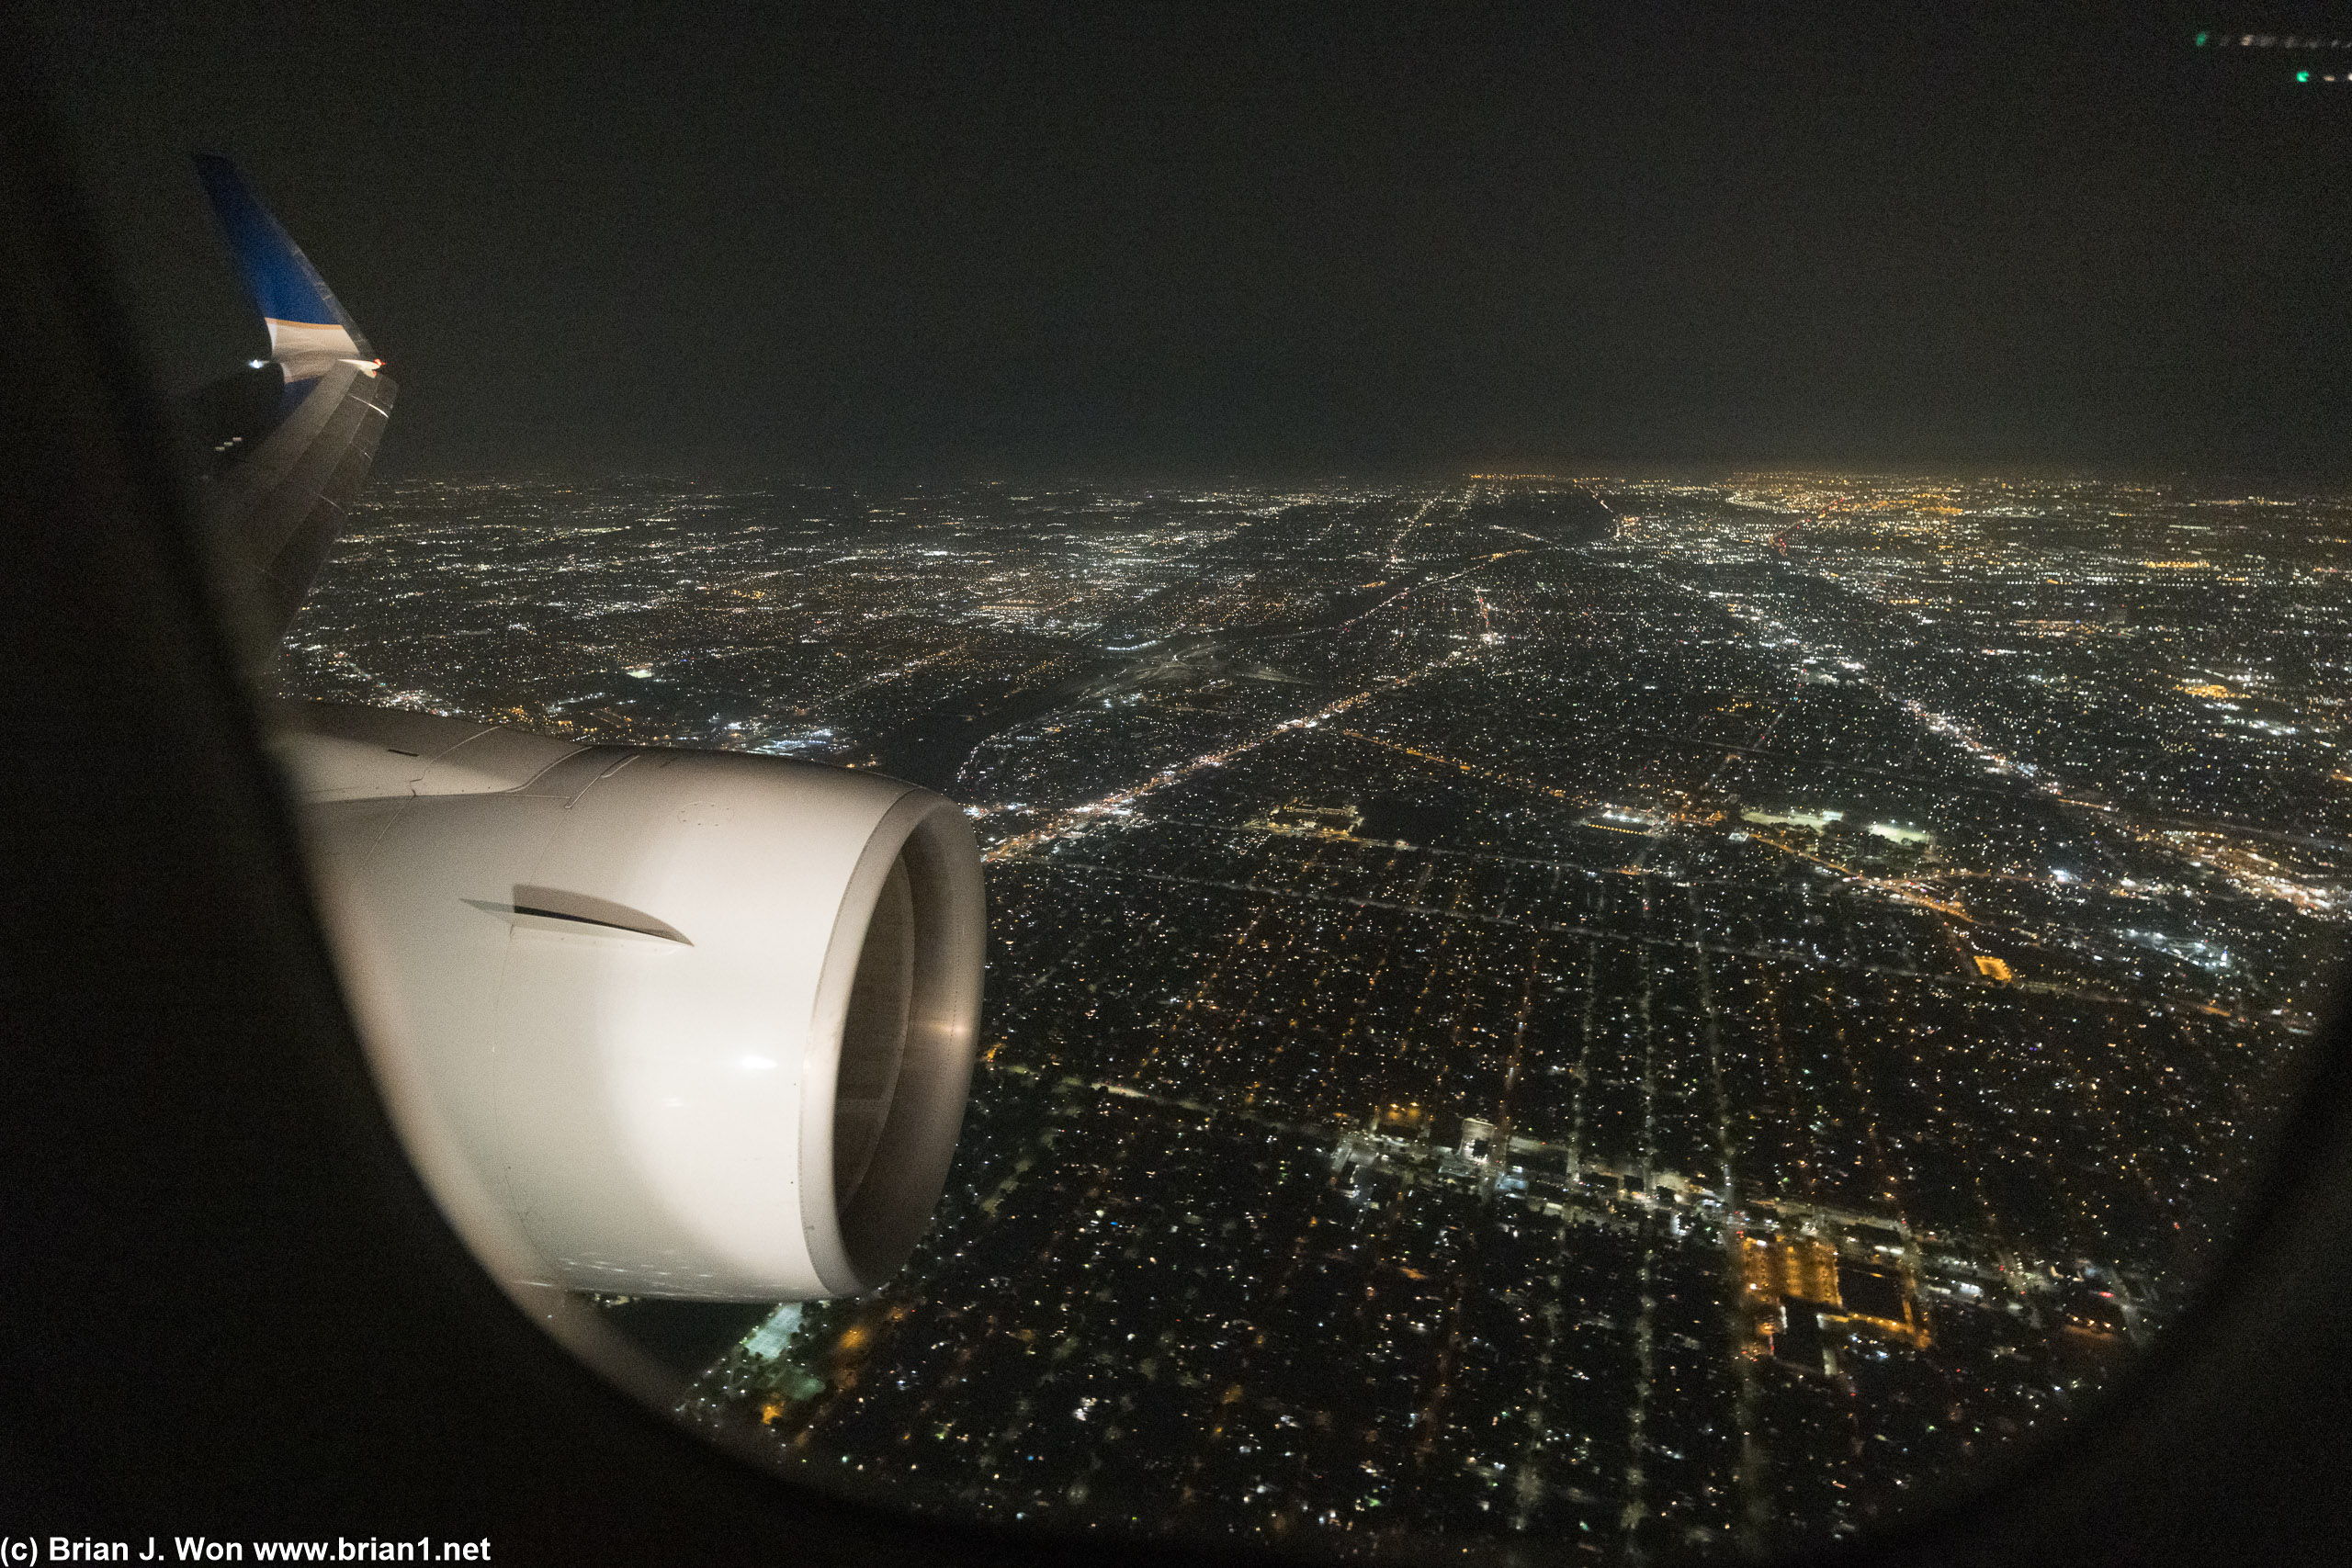 On final approach to LAX.